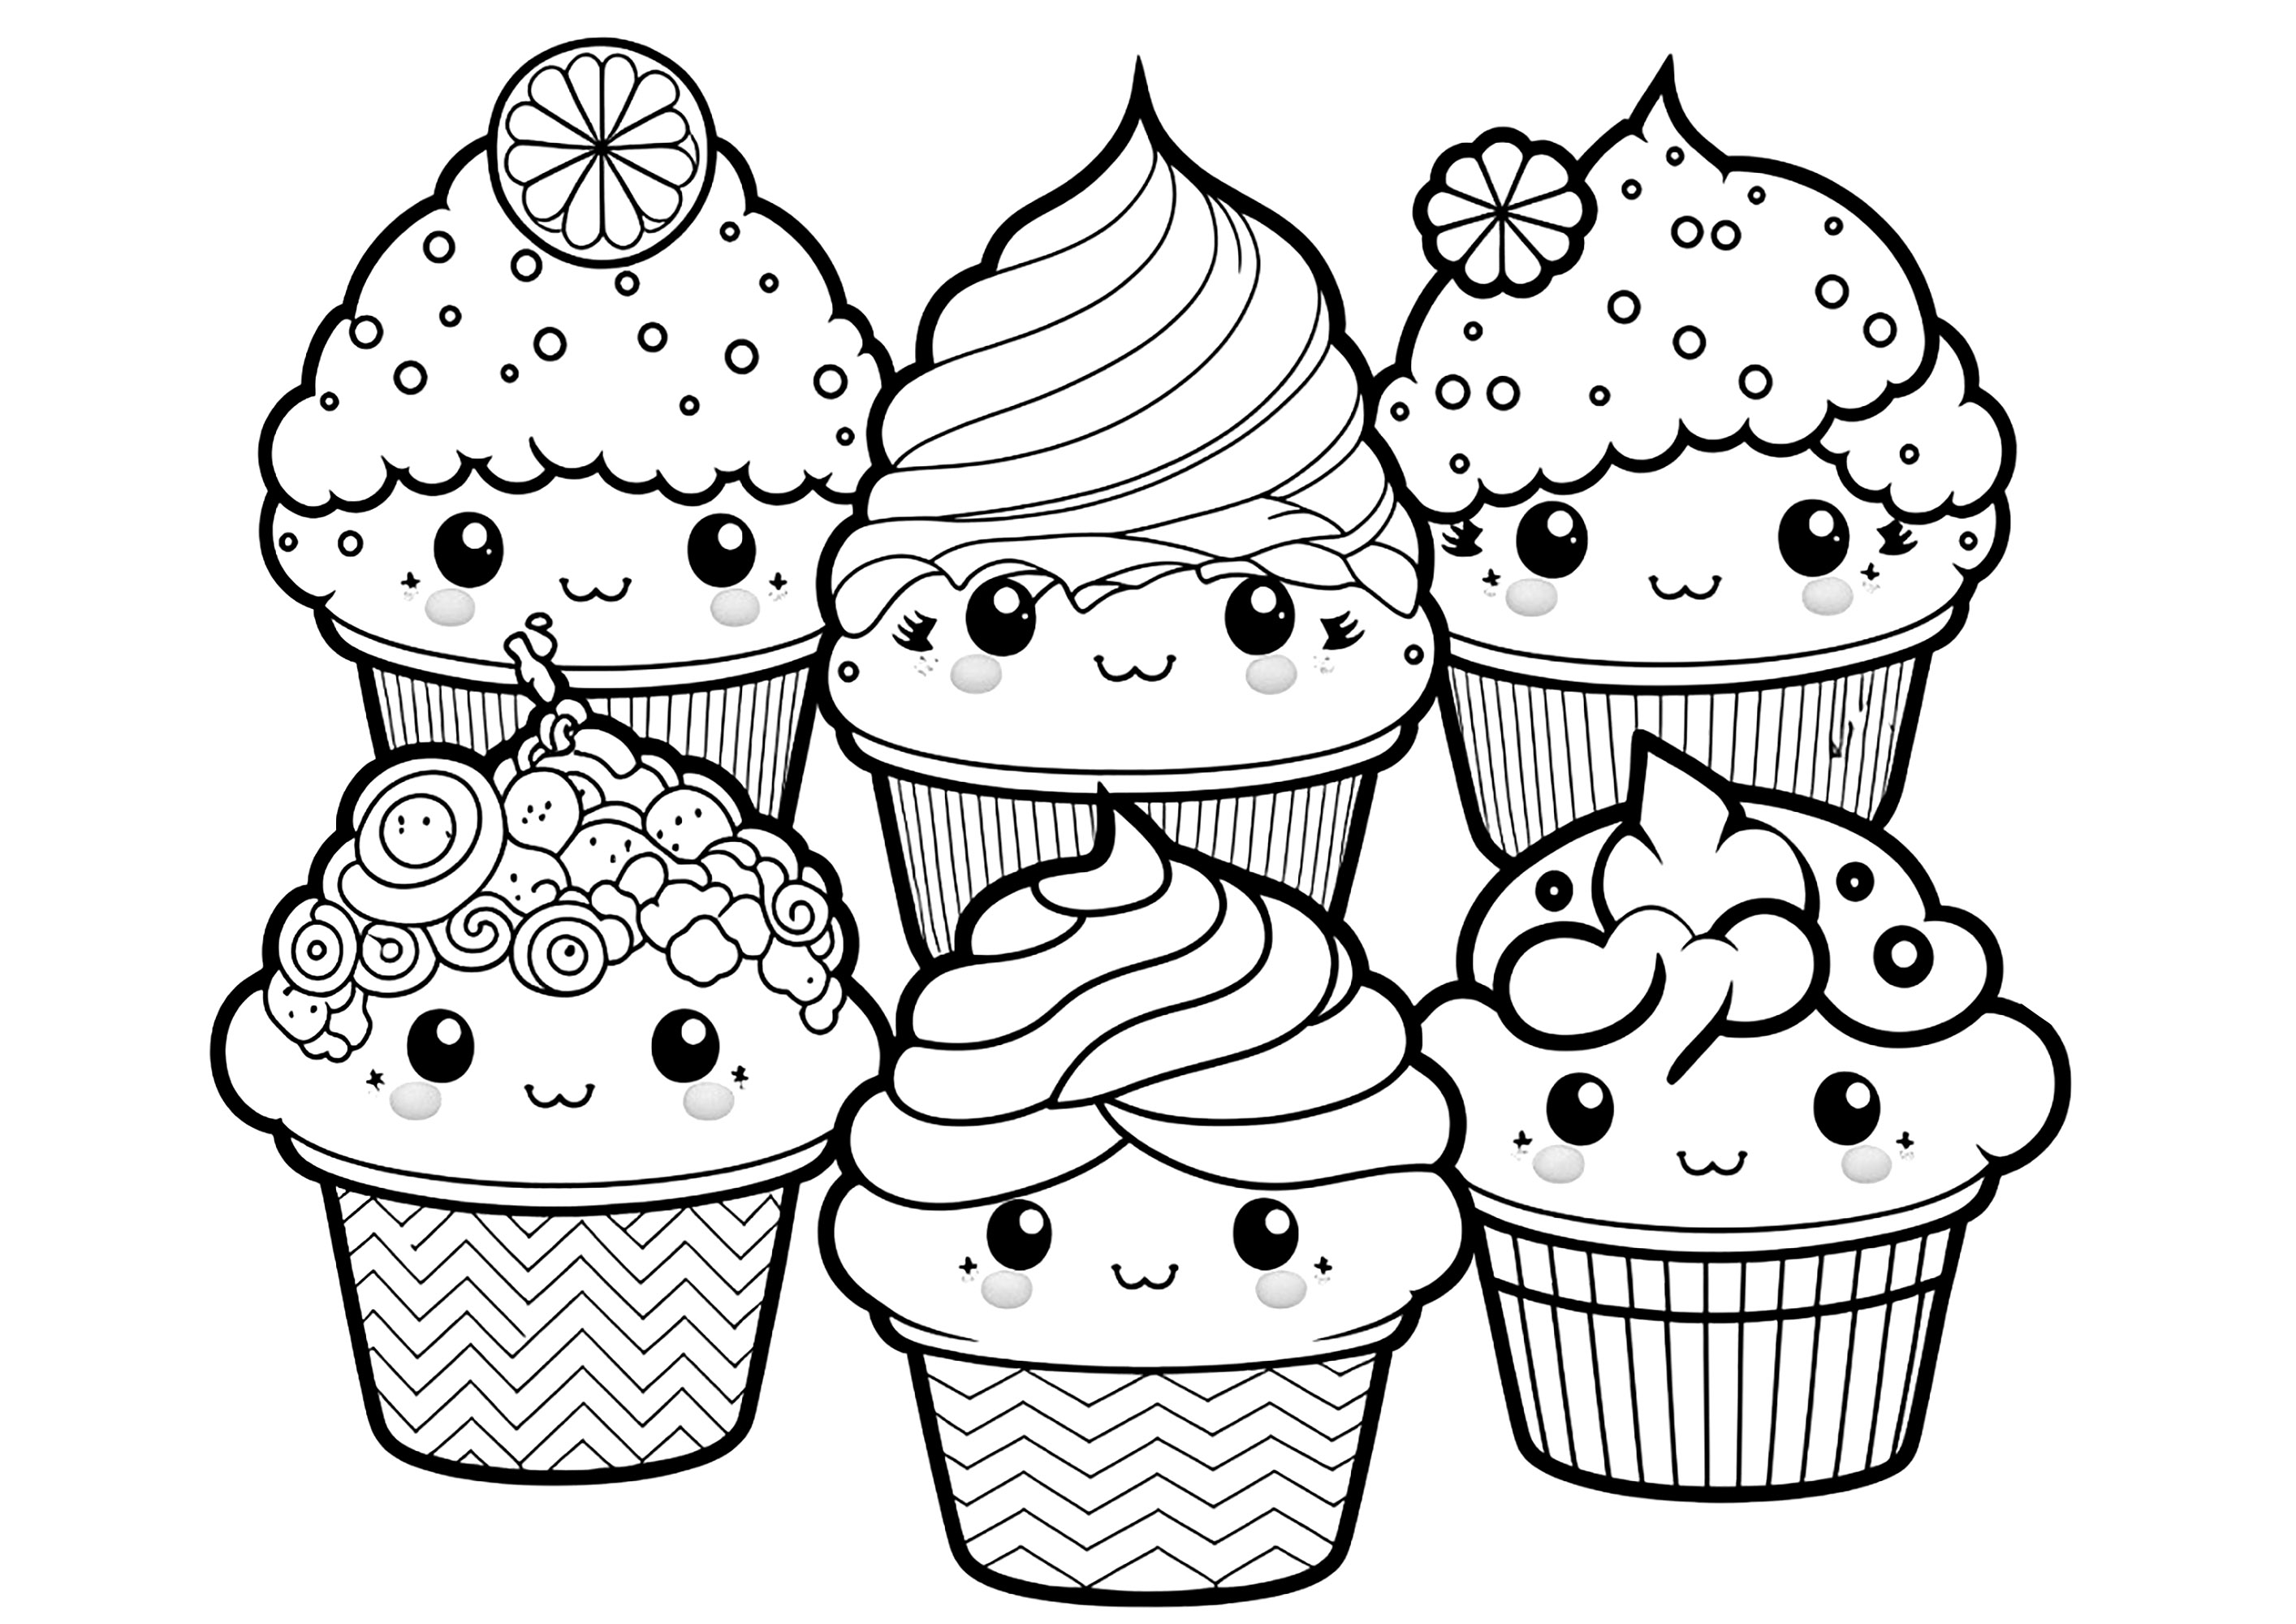 Six cupcakes, simple to color, drawn with the Kawaii style